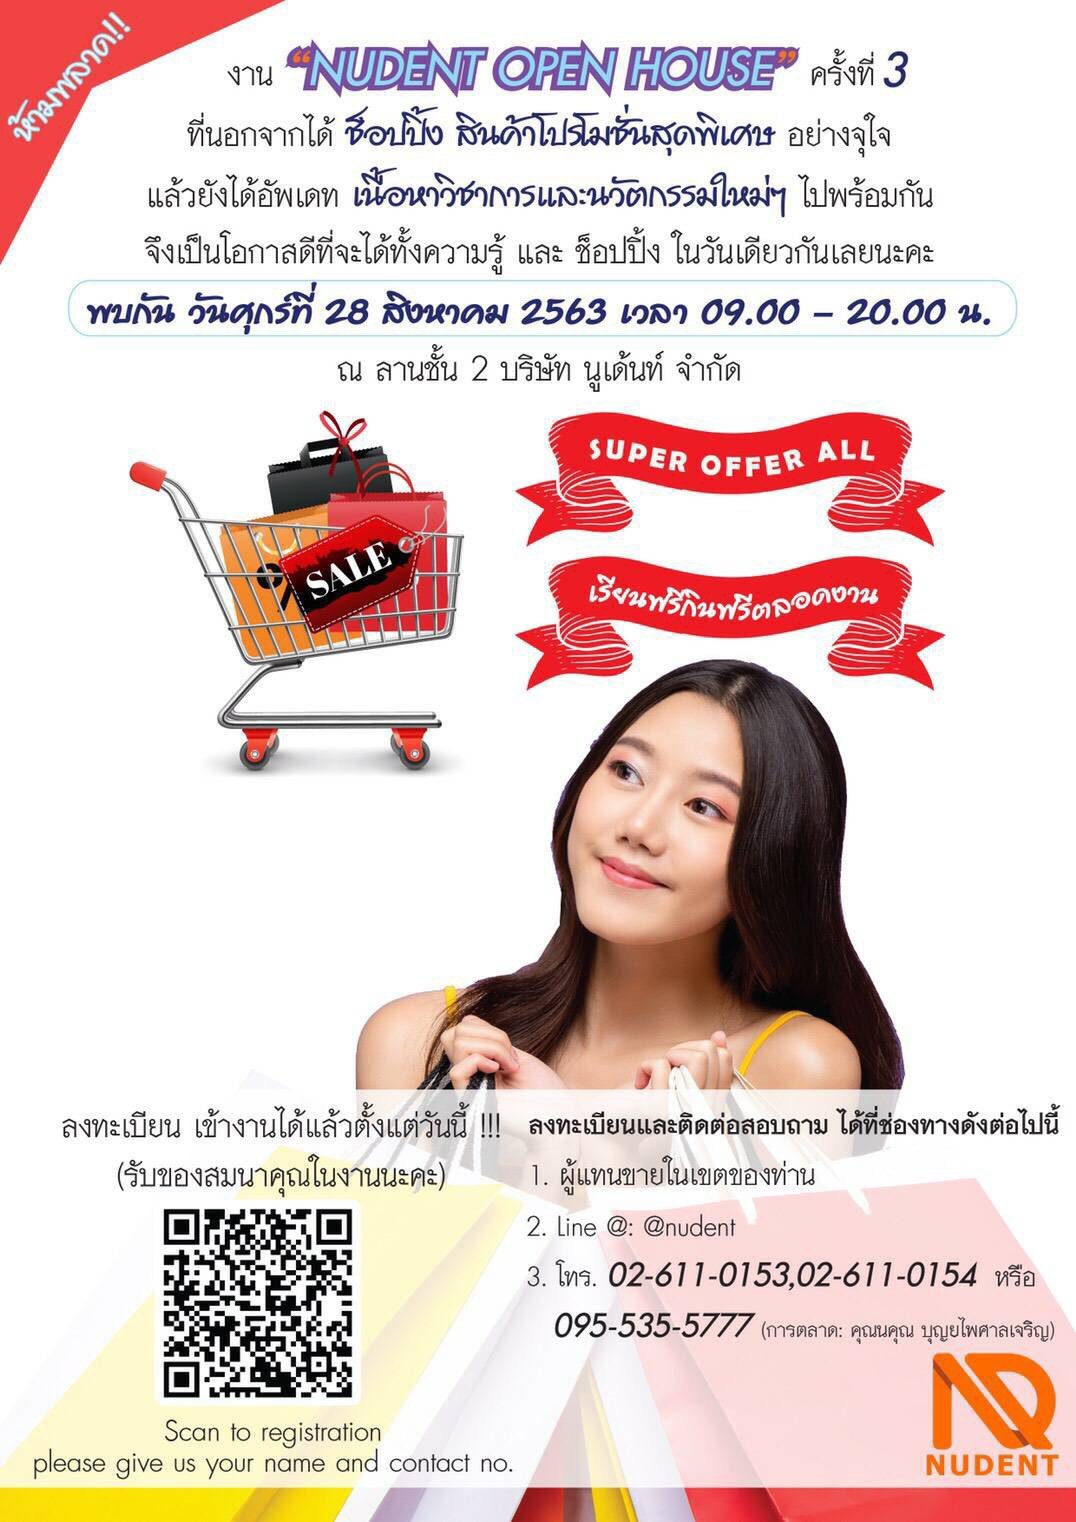 Nudent Open Houseงาน Nudent Open House